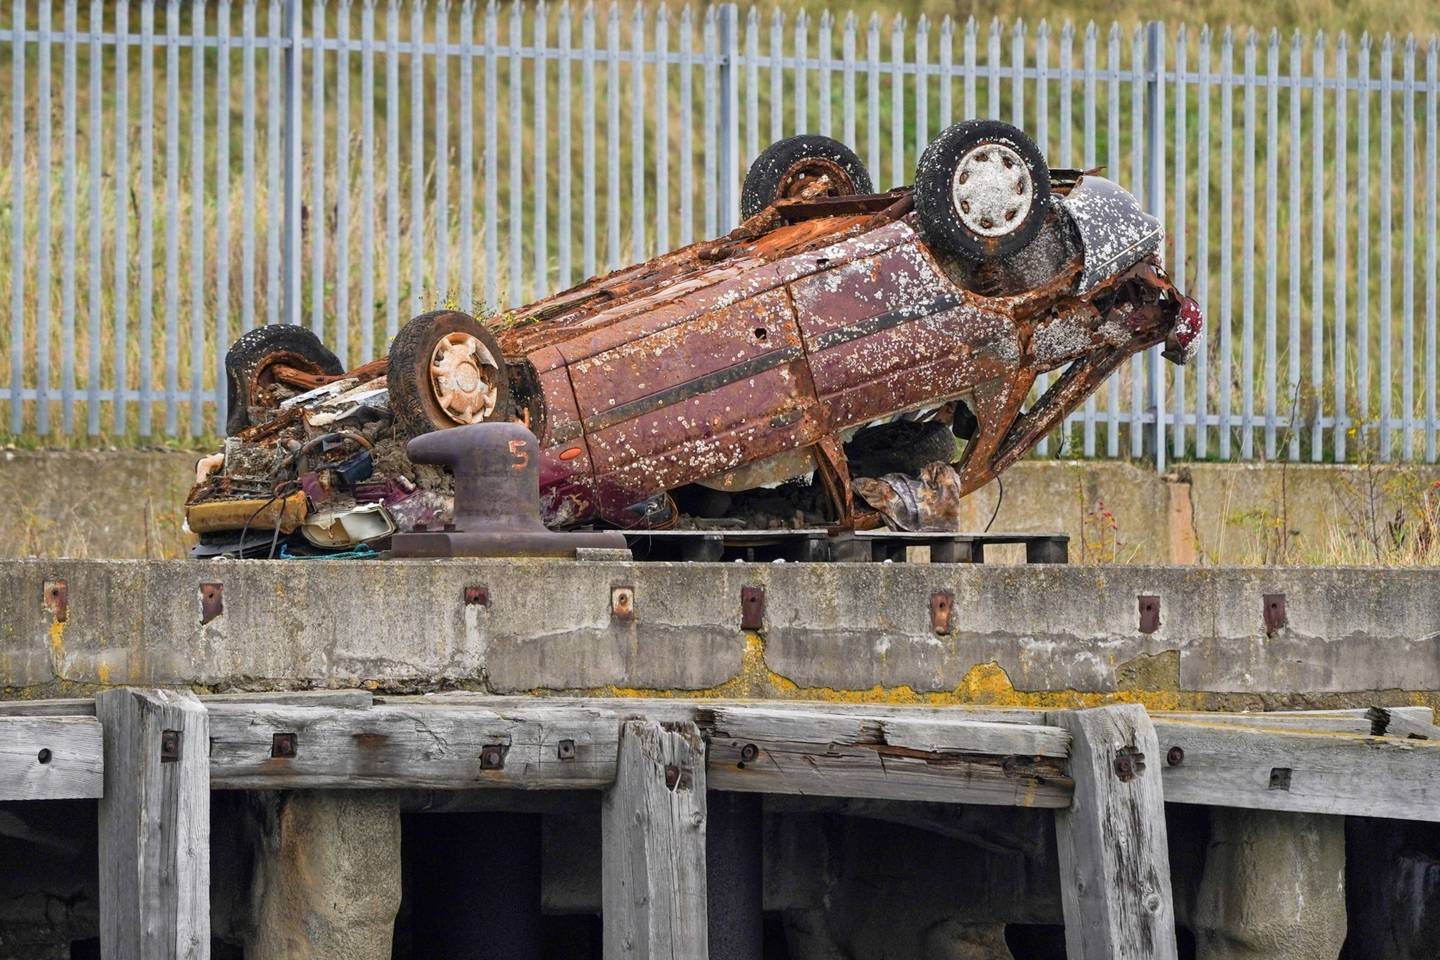 Analysts estimate that scrap metal supplies will increase as the automotive sector recovers.